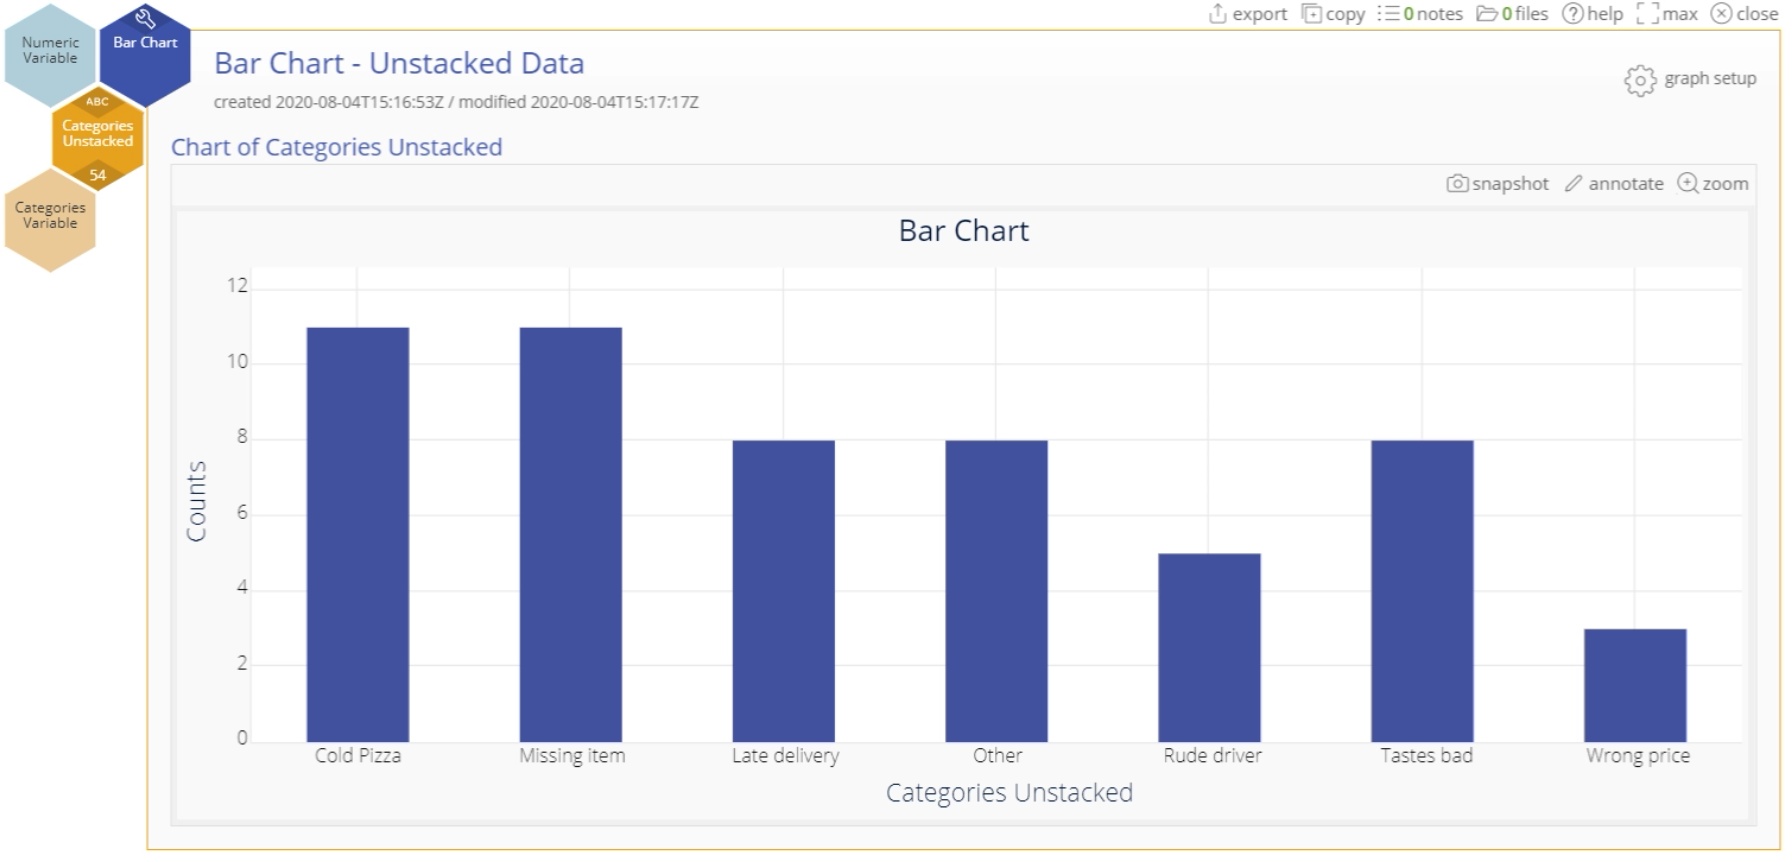 EngineRoom bar chart with unstacked data.